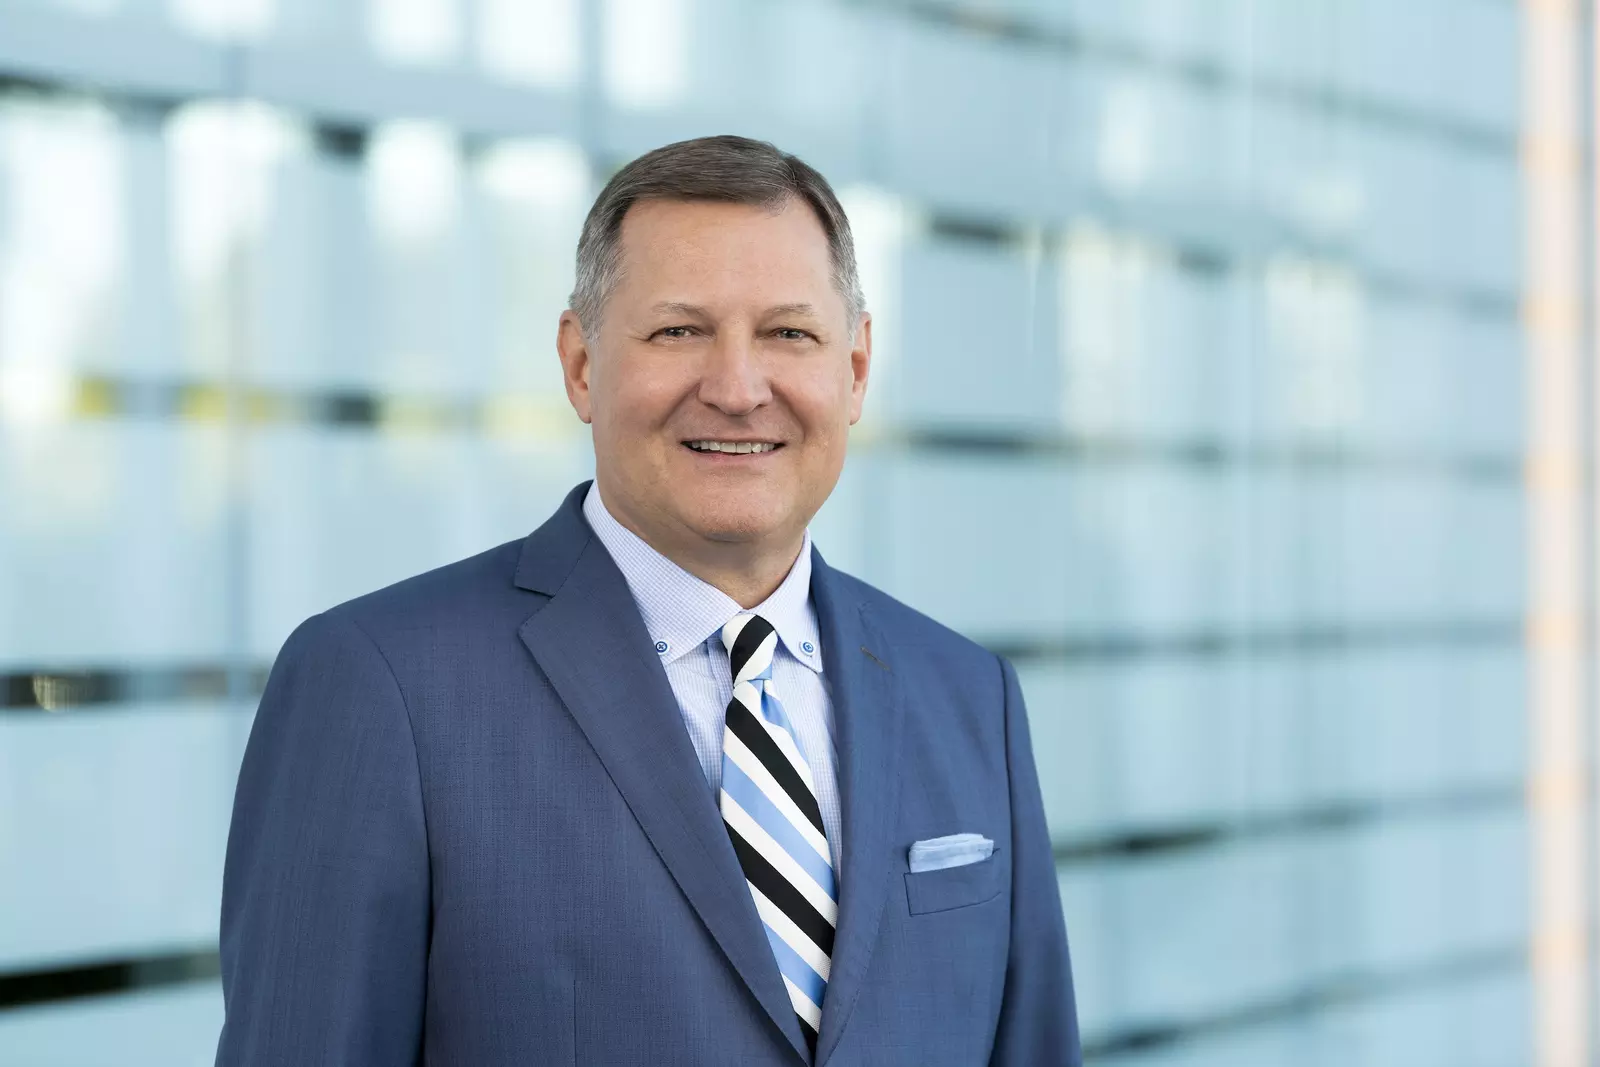 Terry Shaw, President and CEO for AdventHealth